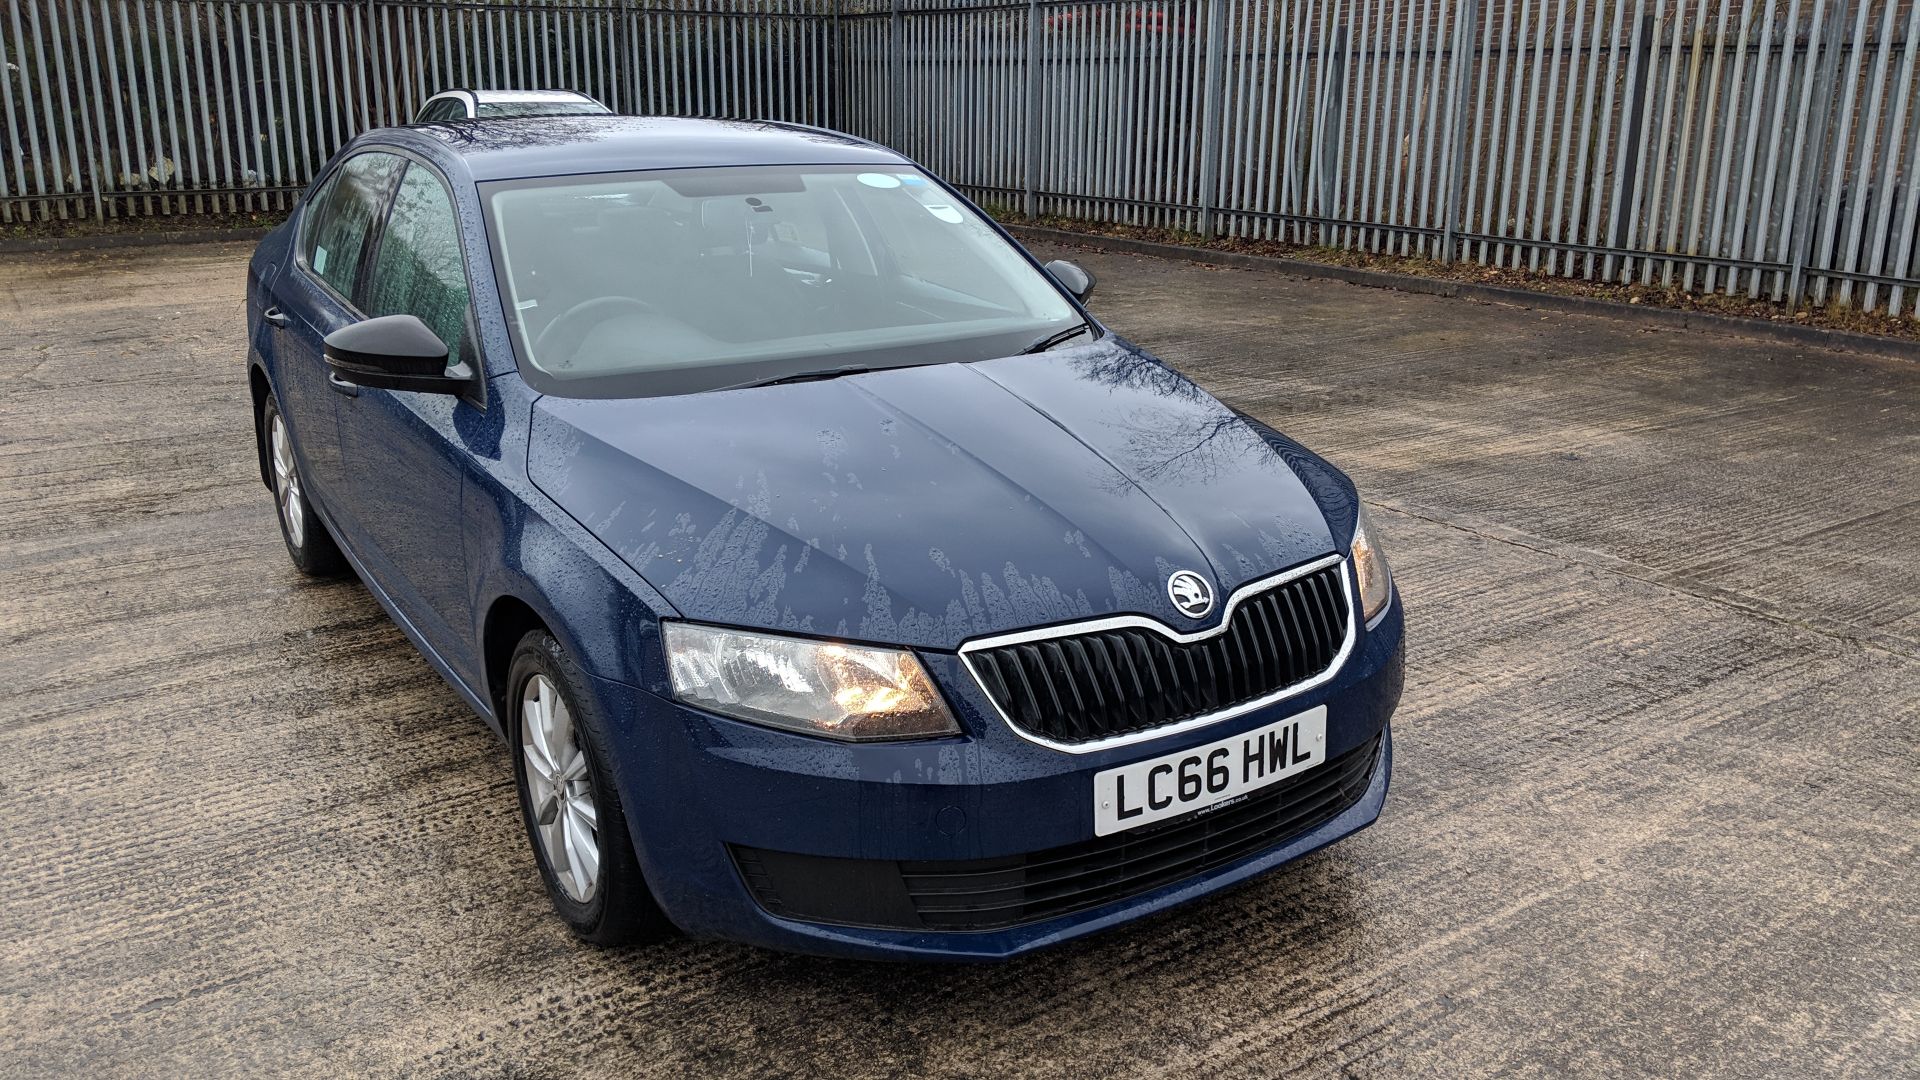 LC66 HWL Skoda Octavia S TDI S-A 1598cc diesel engine. Colour: Blue. First registered: 06.02.17. - Image 2 of 47